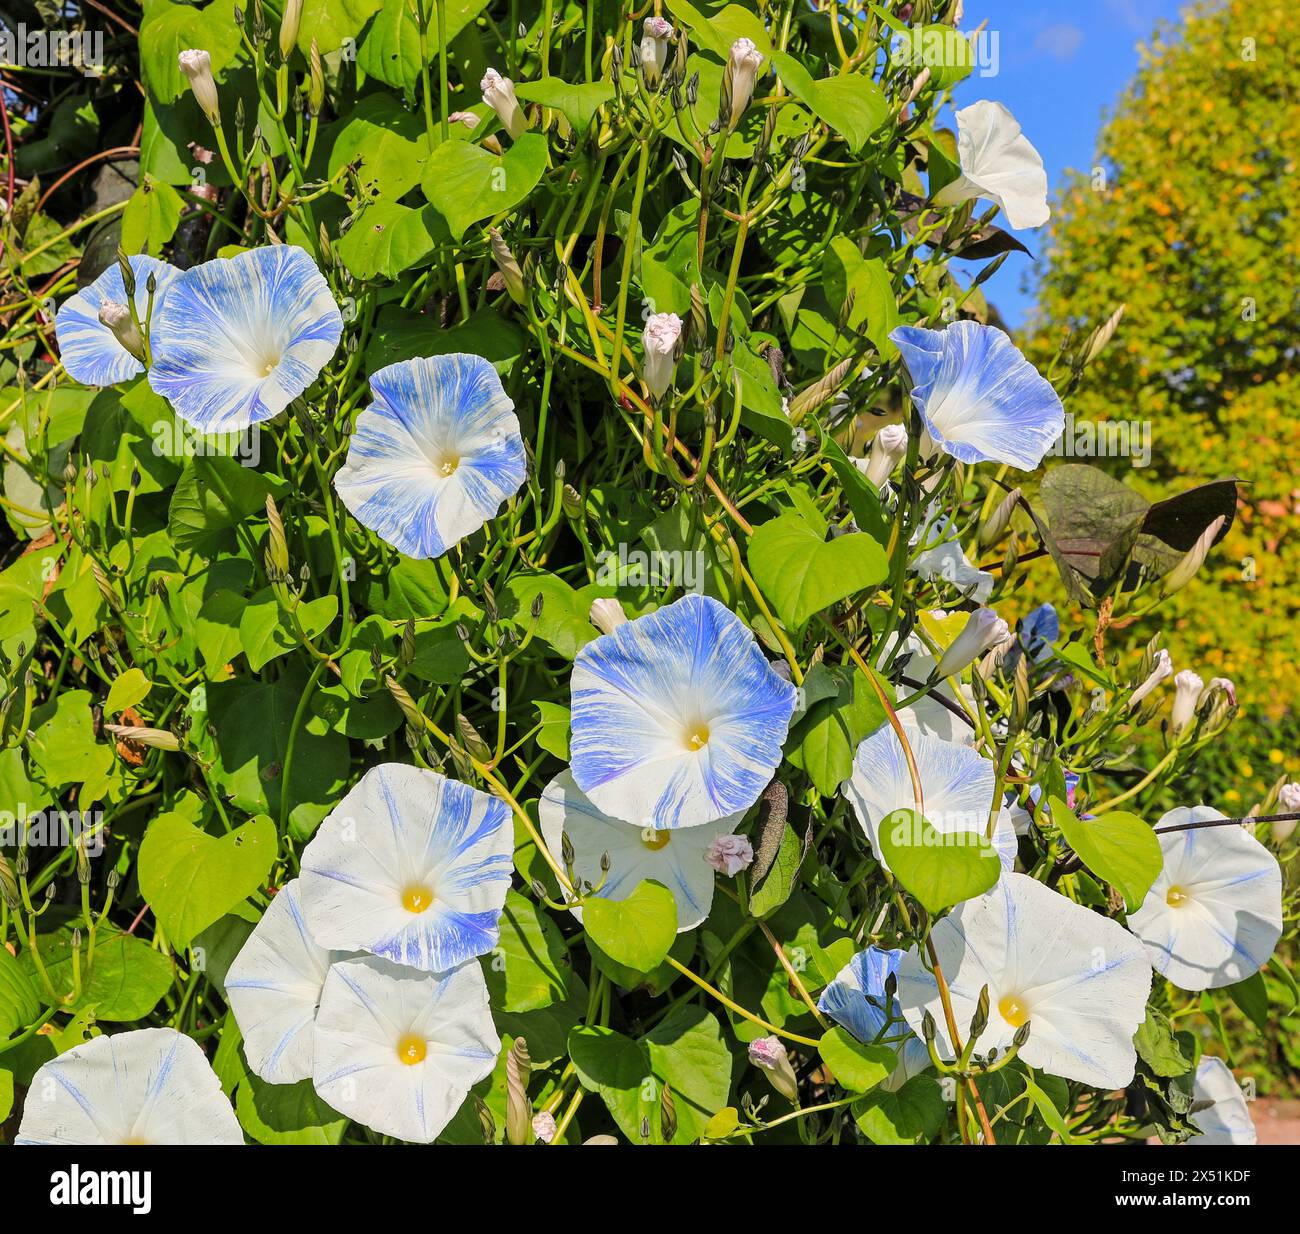 The light blue and white flowers of Ipomoea Tricolor 'Blue Star', Light Blue Morning Glory or convolvulus tricolor, Devon, England, UK Stock Photo